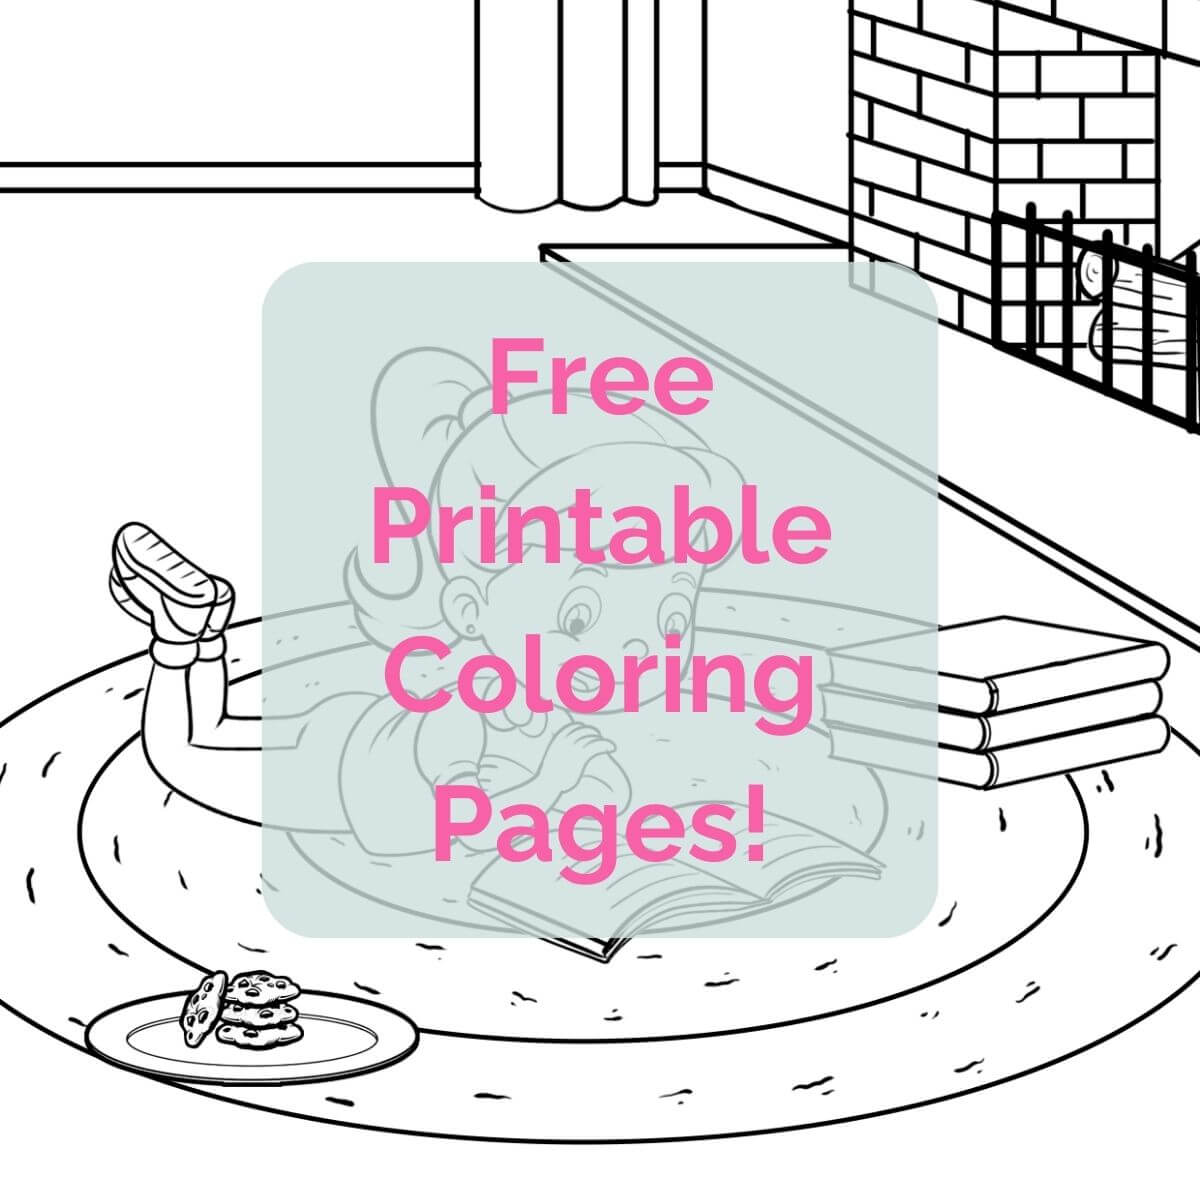 Free printable baby coloring pages cover image